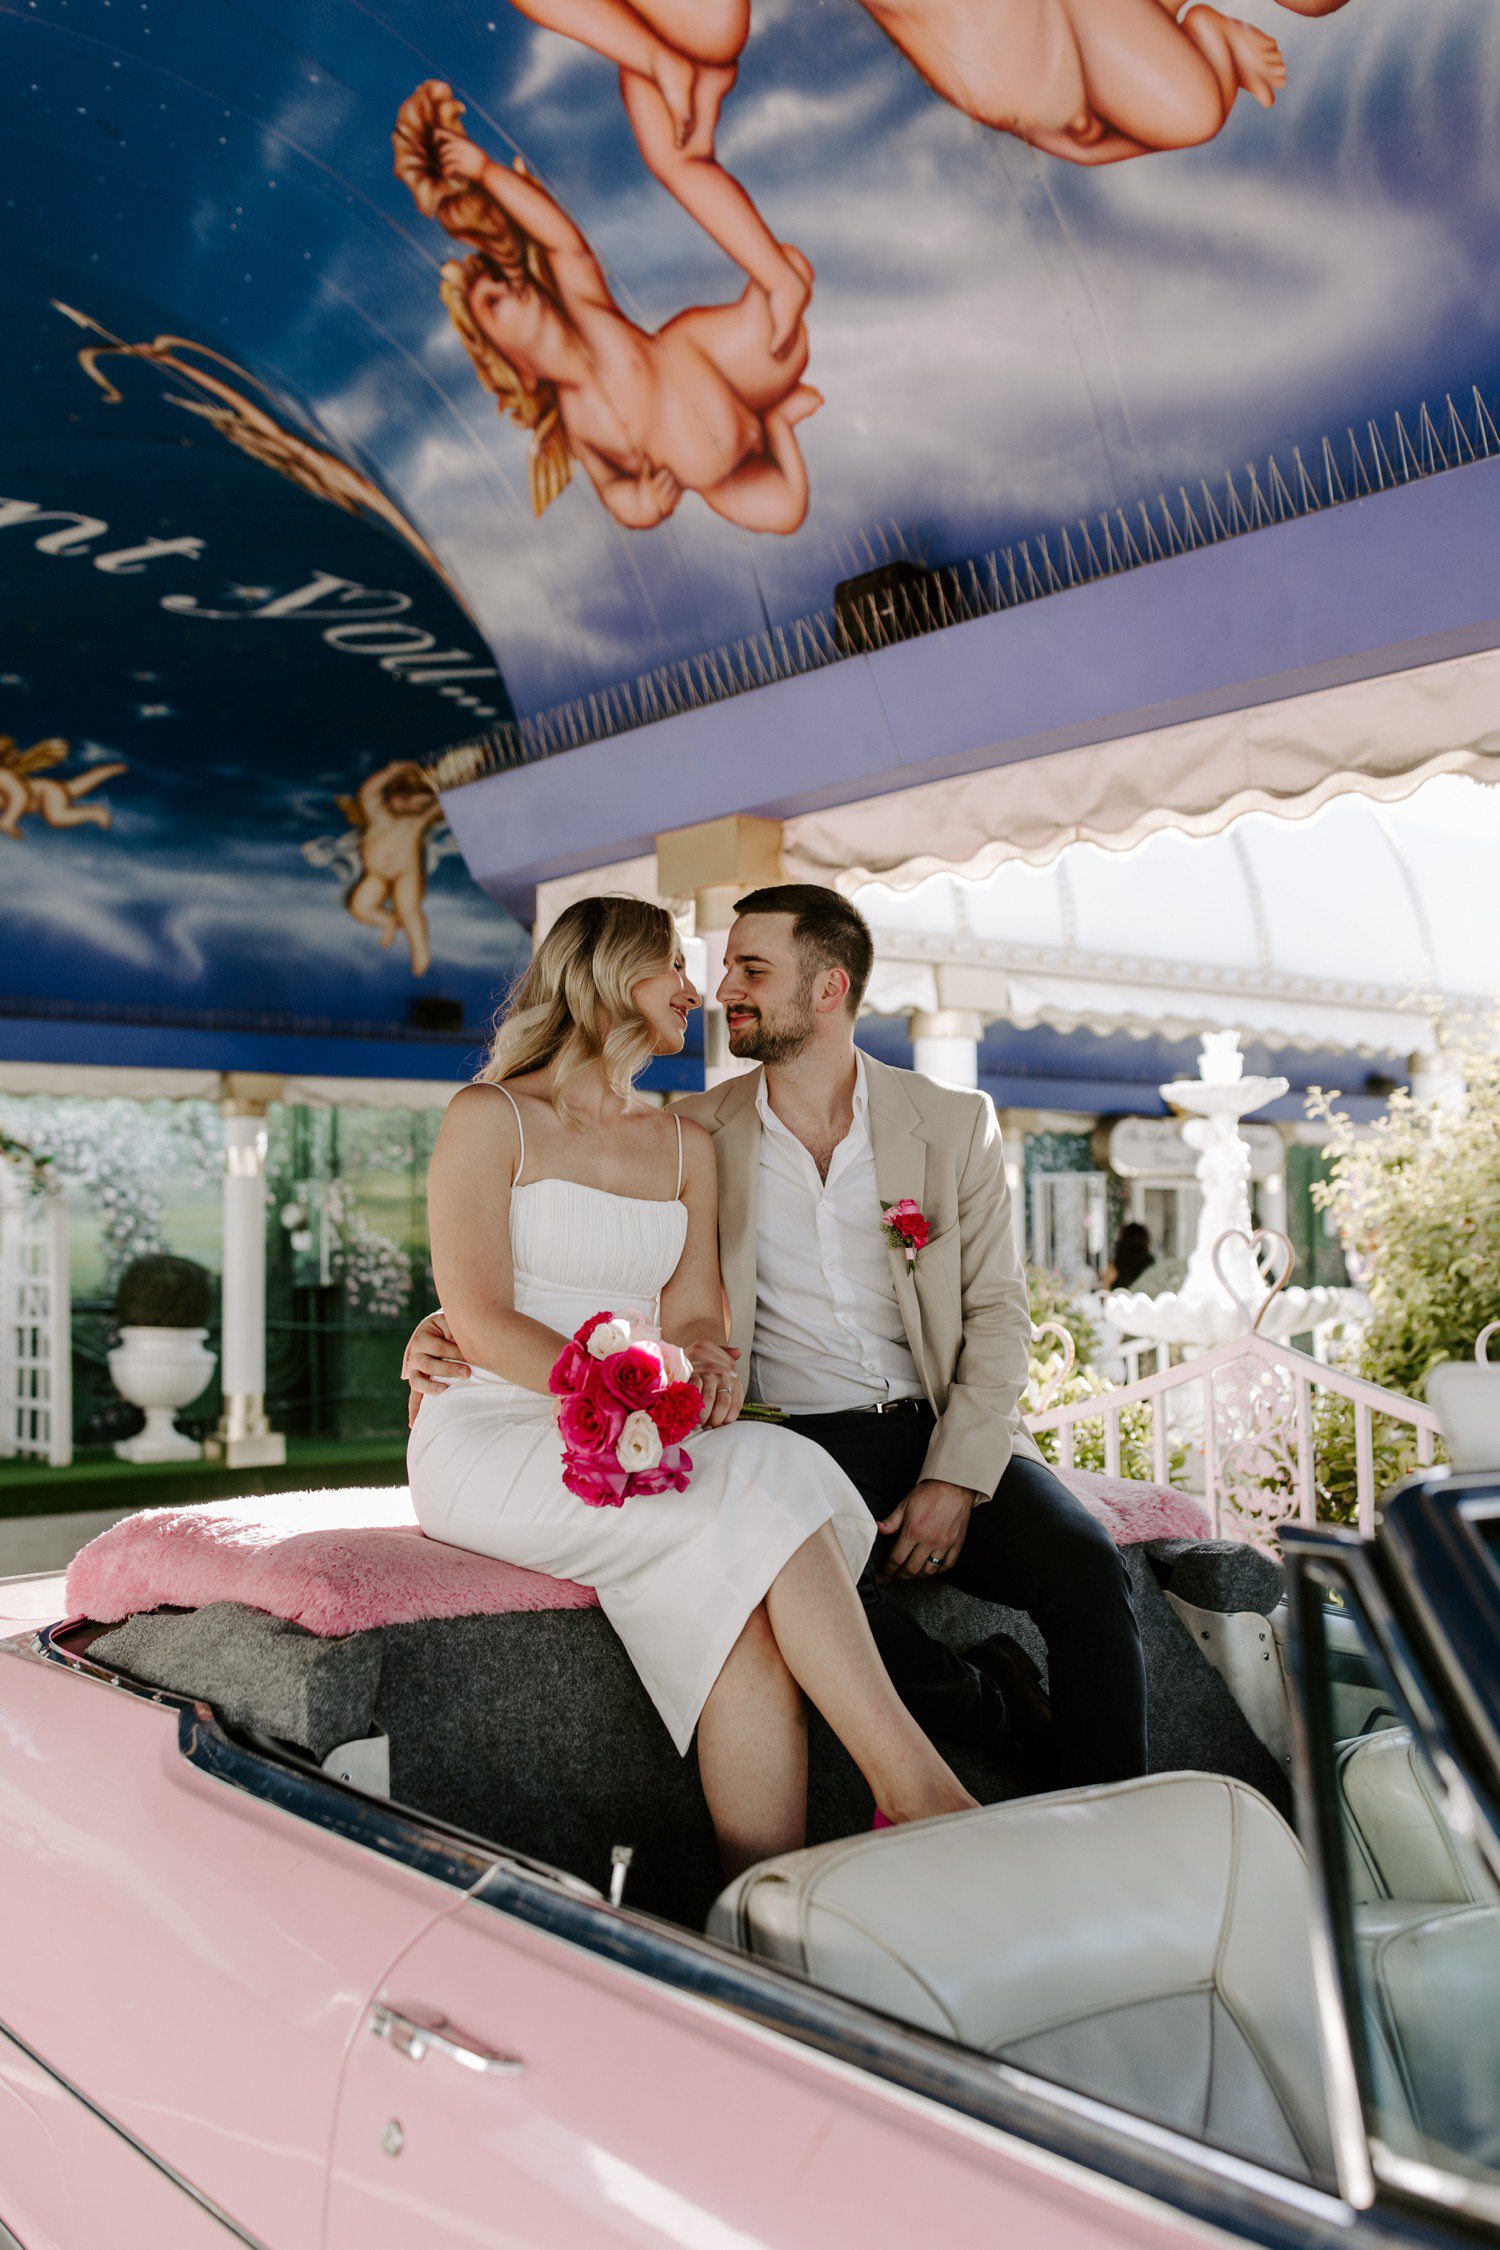 Photos in the pink Cadillac at A Little White Chapel.